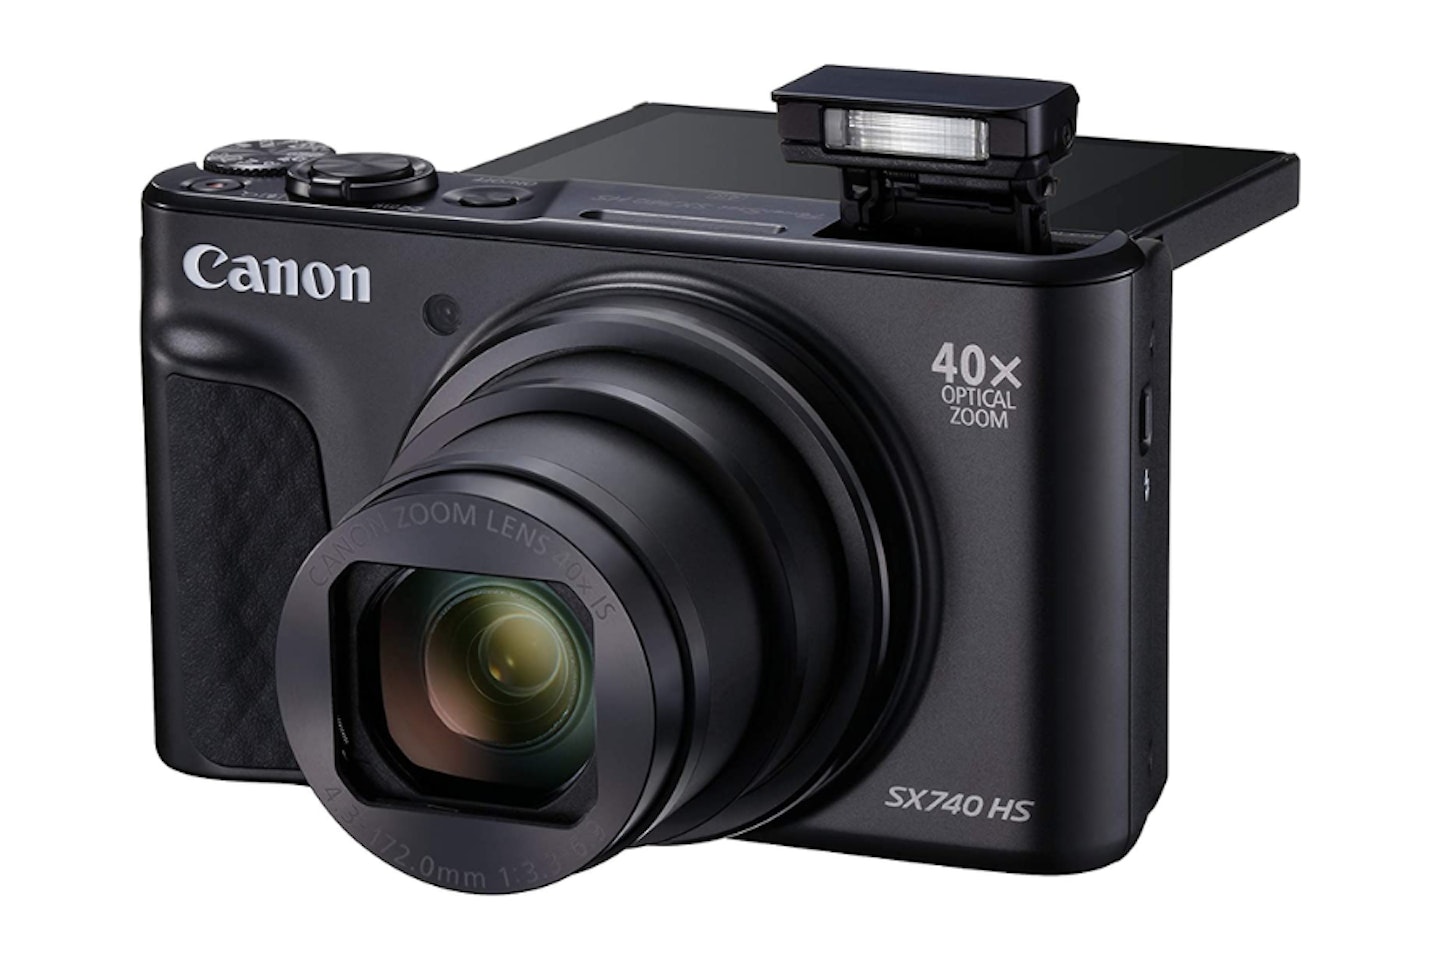 Canon SX740 HS PowerShot - one of the best entry-level cameras